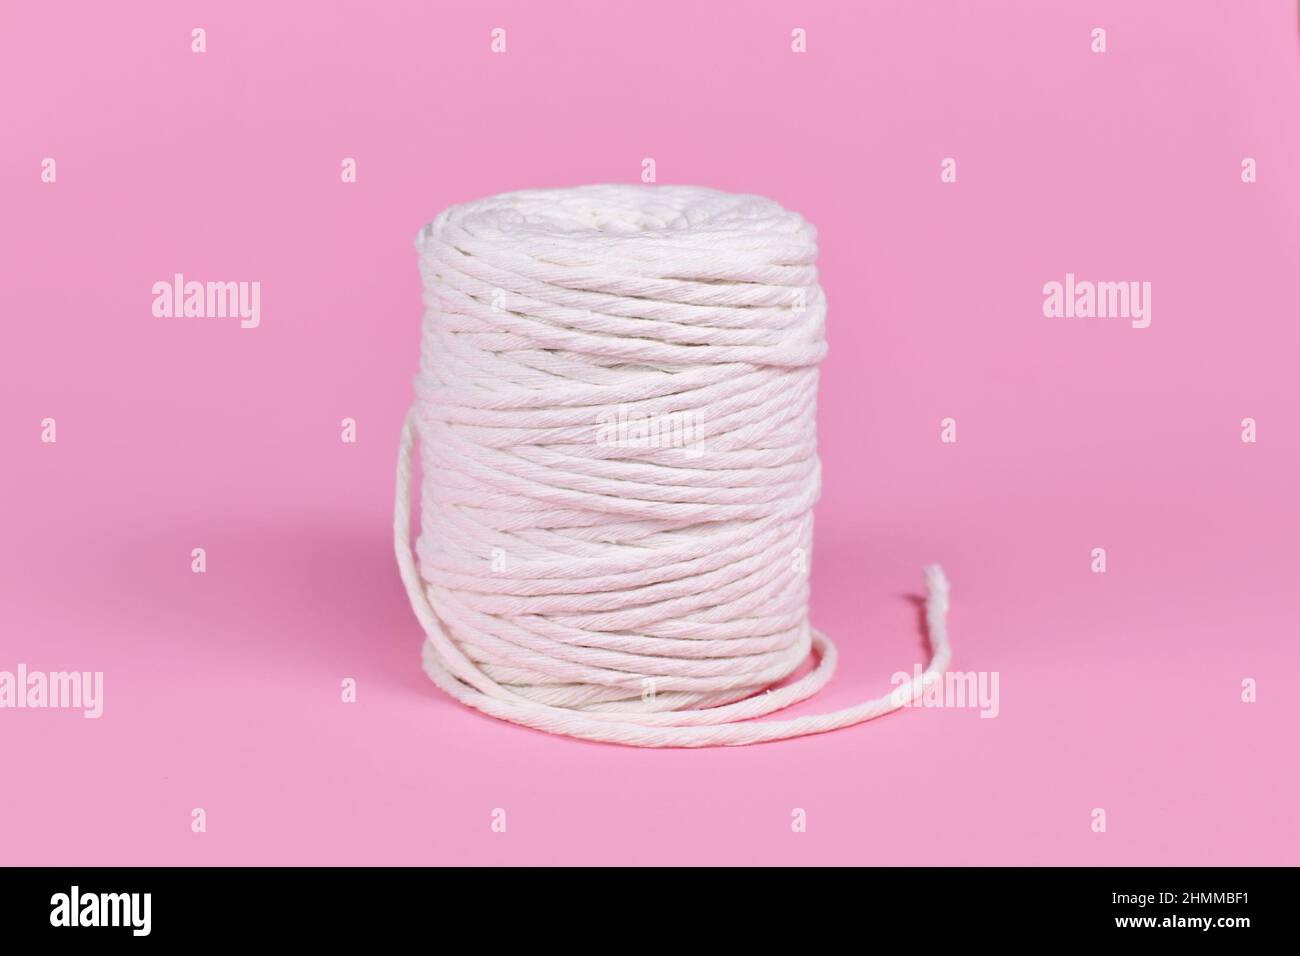 Rolls of cotton macrame cord for crafting on pink background Stock Photo